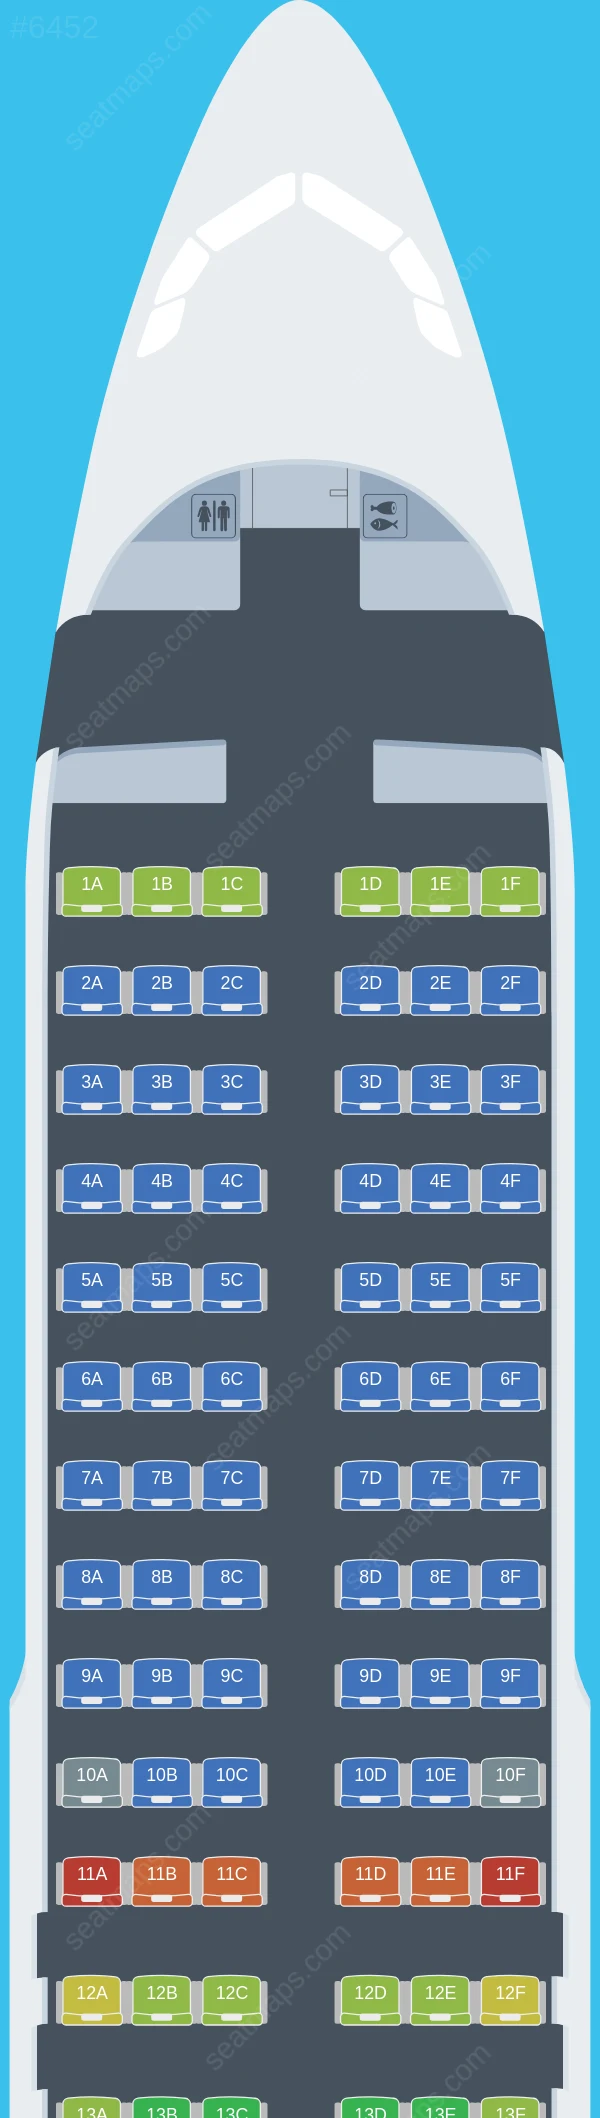 AirBlue Airbus A320-200 seatmap preview